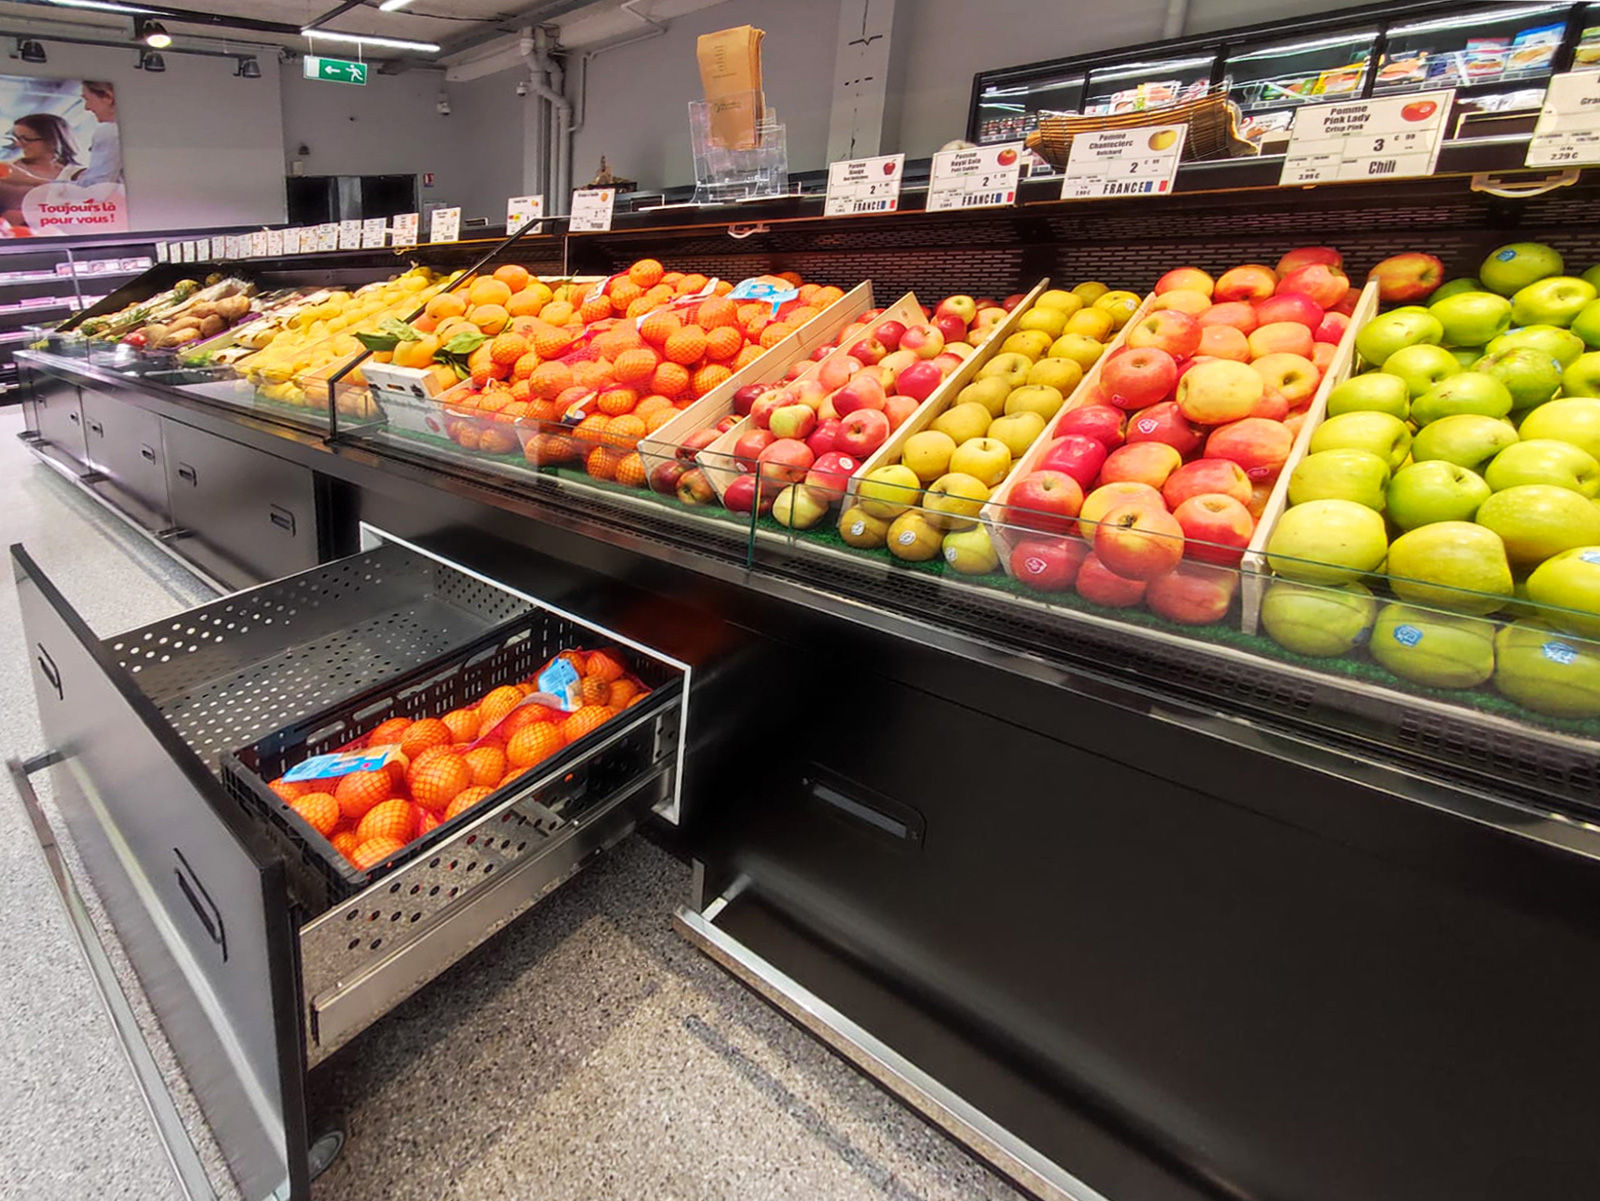 Specialized units for vegetables and fruit sales Missouri VF MC VF self M, supermarket AUCHAN (France)